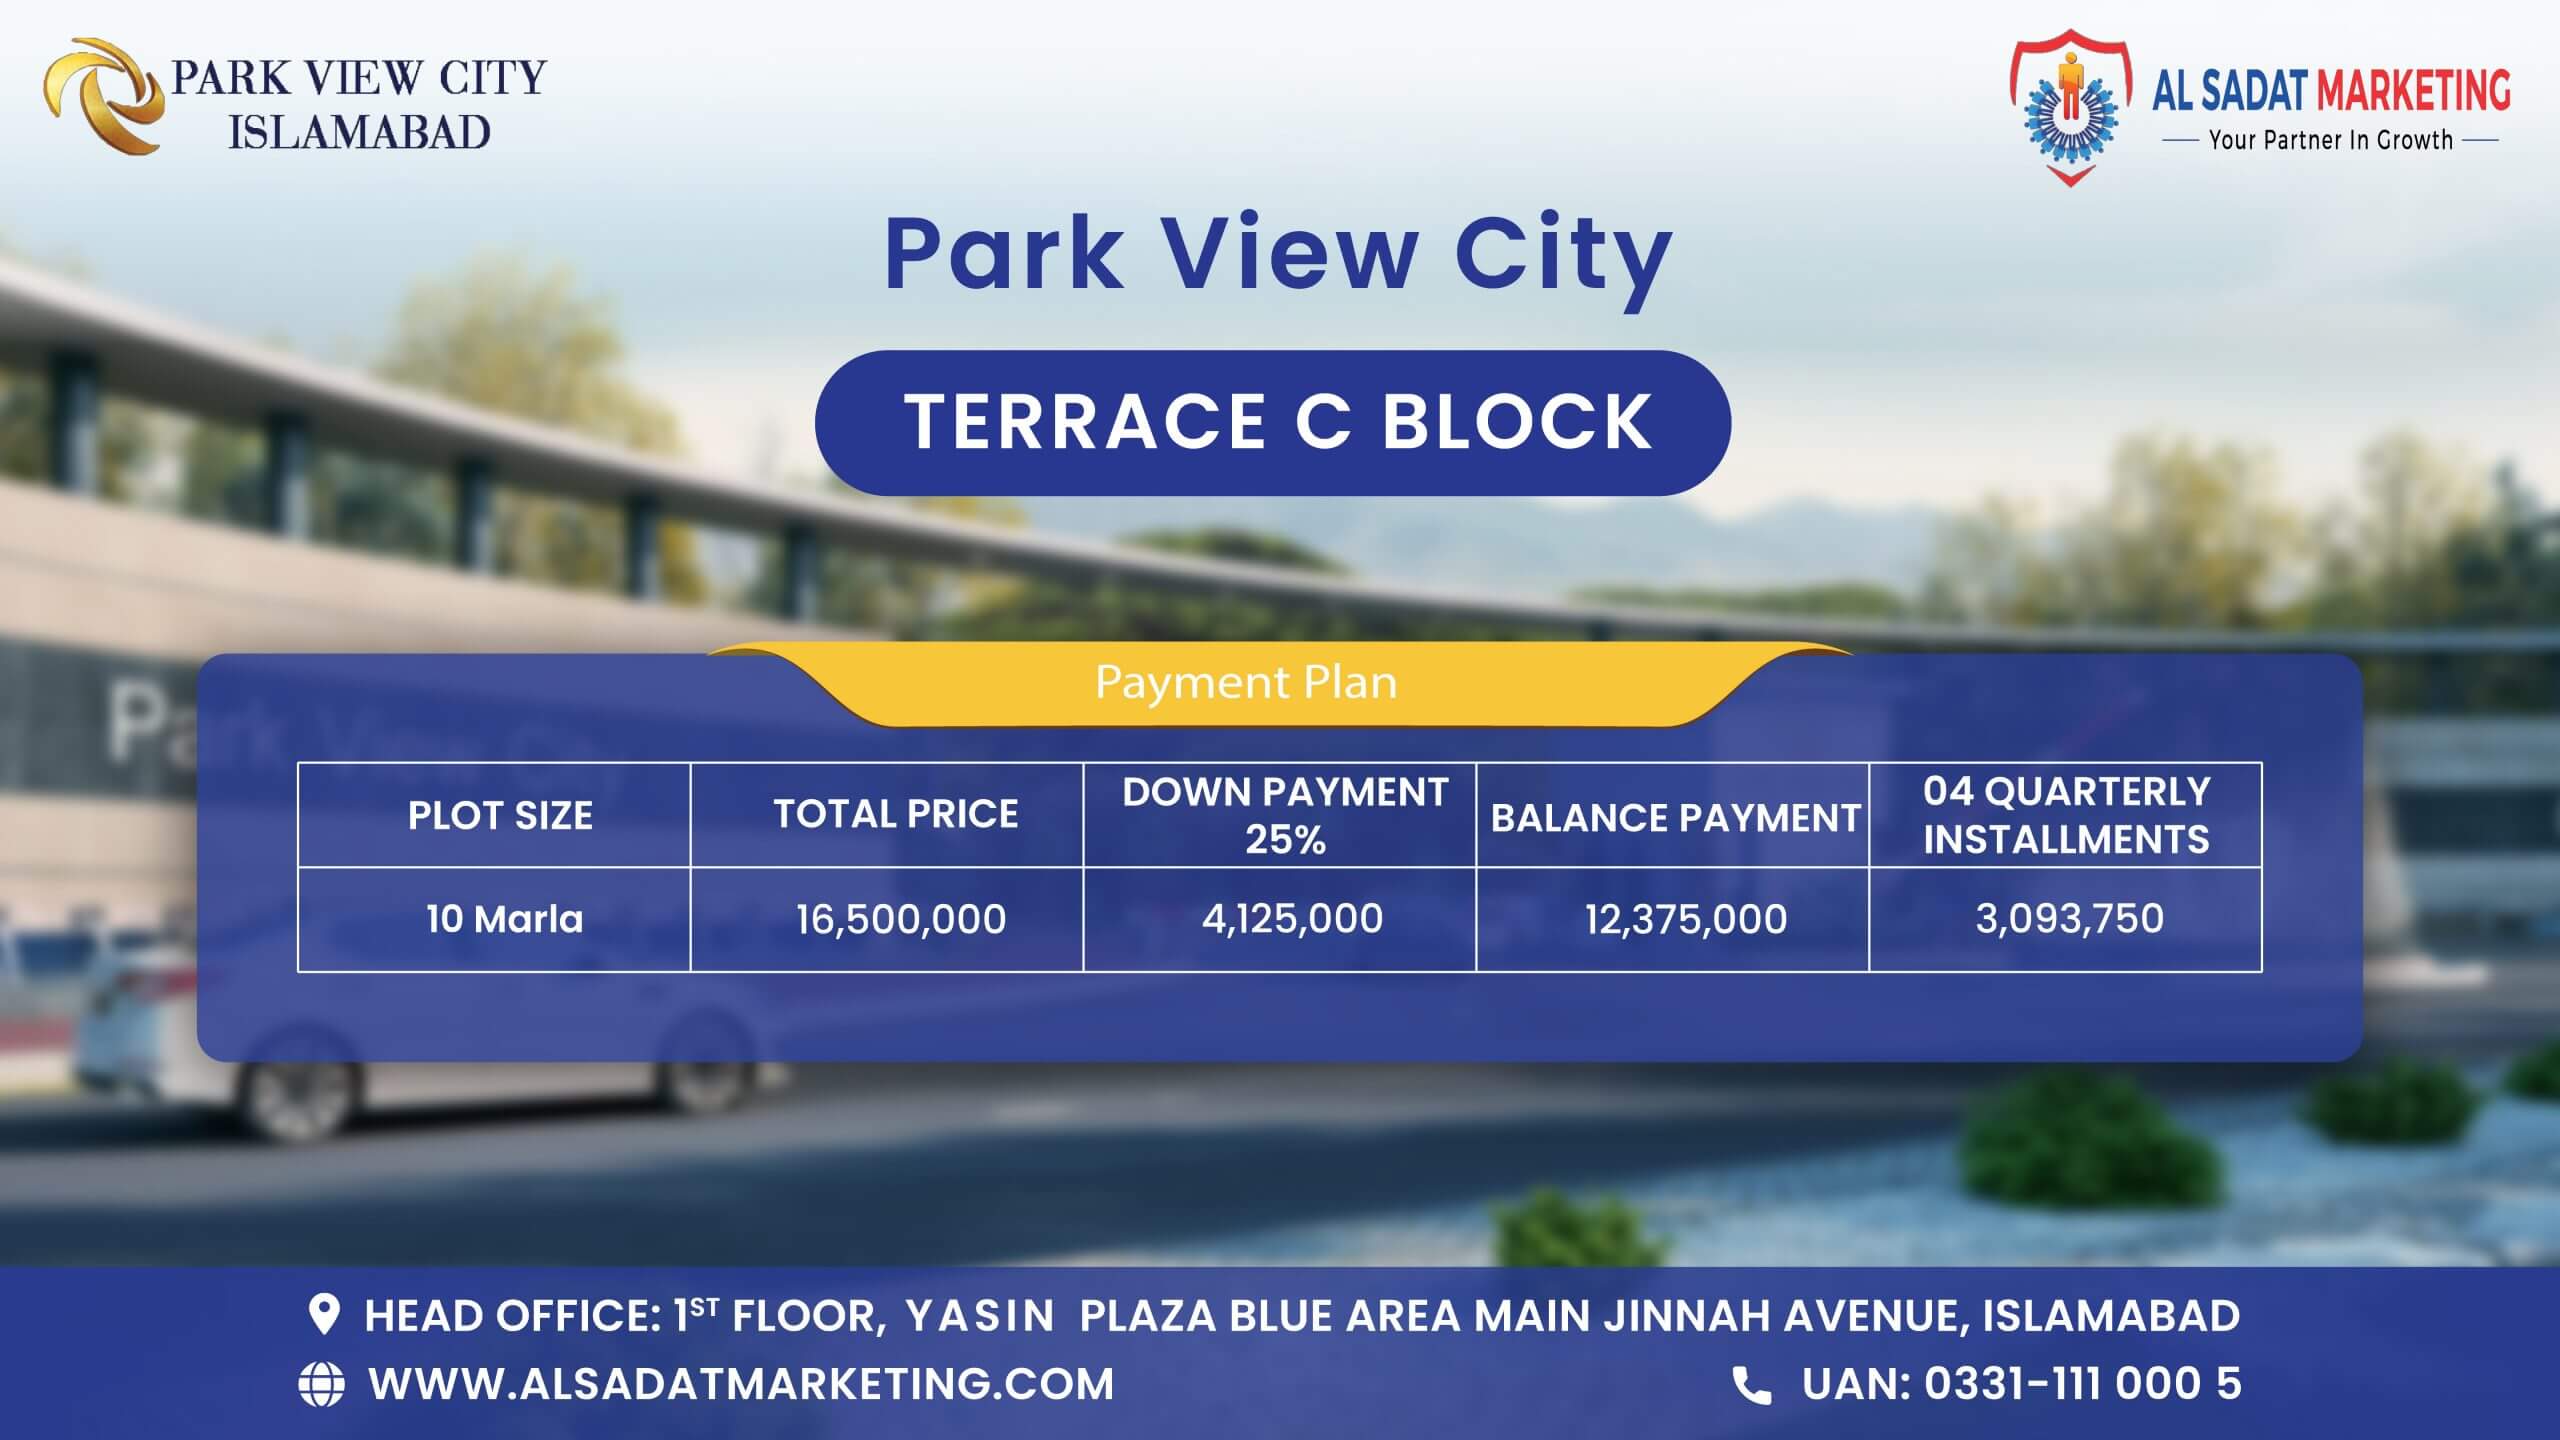 park view city islamabad terrace c block residential plots updated payment plan - park view city terrace c block residential plots updated payment plan - park view city islamabad terrace c block updated payment plan - park view city terrace c block updated payment plan - park view city islamabad payment plan - park view city payment plan - payment plan of park view city islamabad – payment plan of park view city – park view city islamabad – park view city – park view city housing society - park view city islamabad housing society – park view city real estate project - park view city islamabad real estate project - al sadat marketing - alsadat marketing - al-sadat marketing